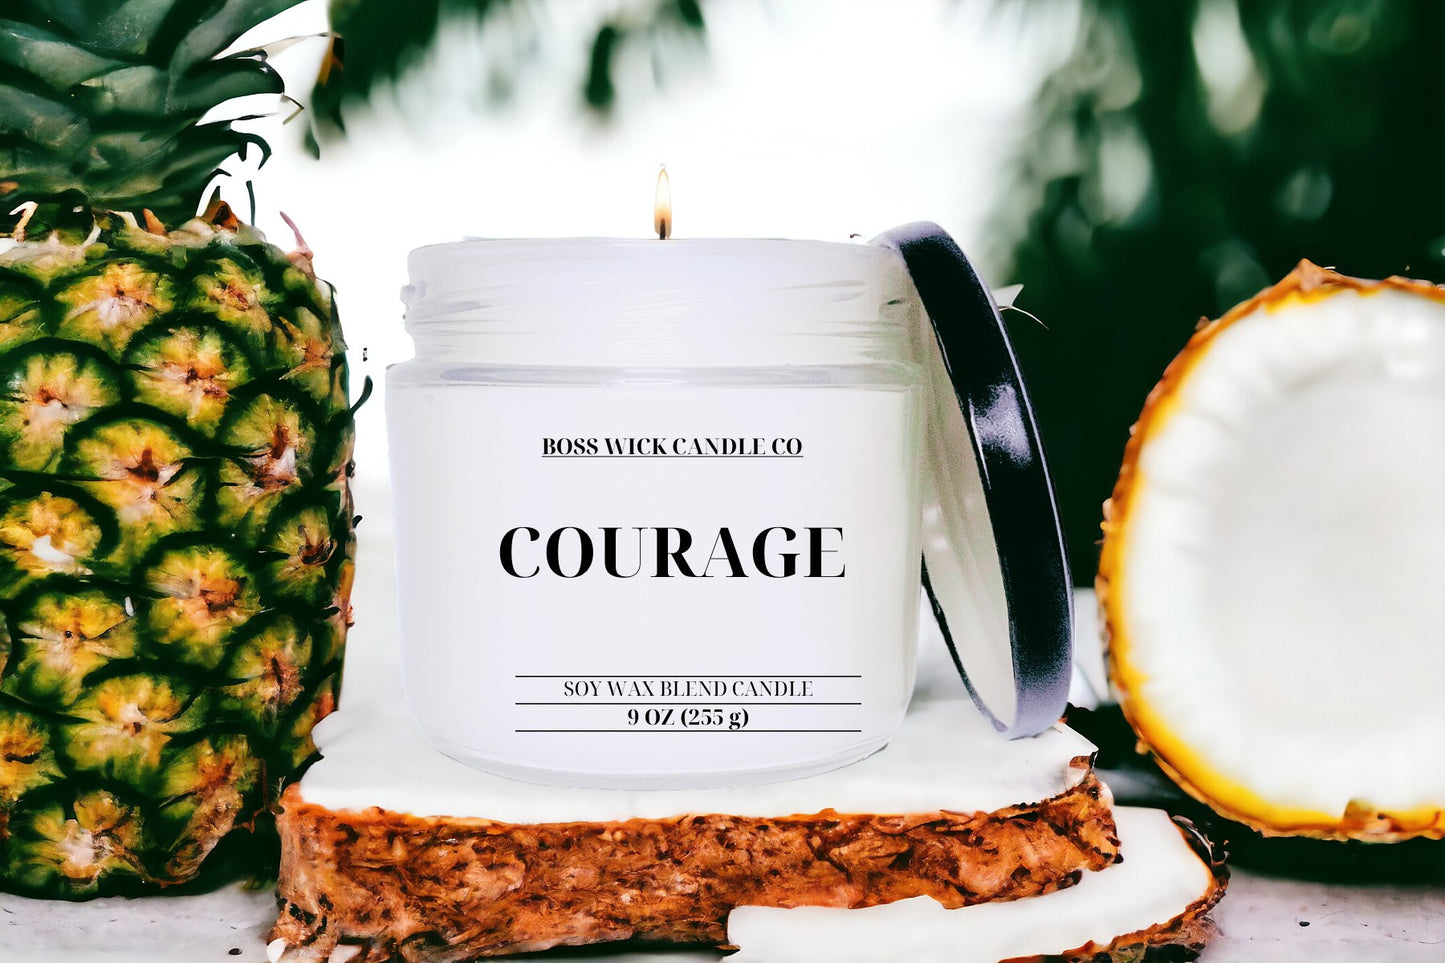 Be a courageous boss with this powerful candle! A pleasant blend of pineapple, coconut, and sugary notes symbolize the strength to persevere. Ignite the courage within and strive for greatness. Unleash the power of courage and become a leader!